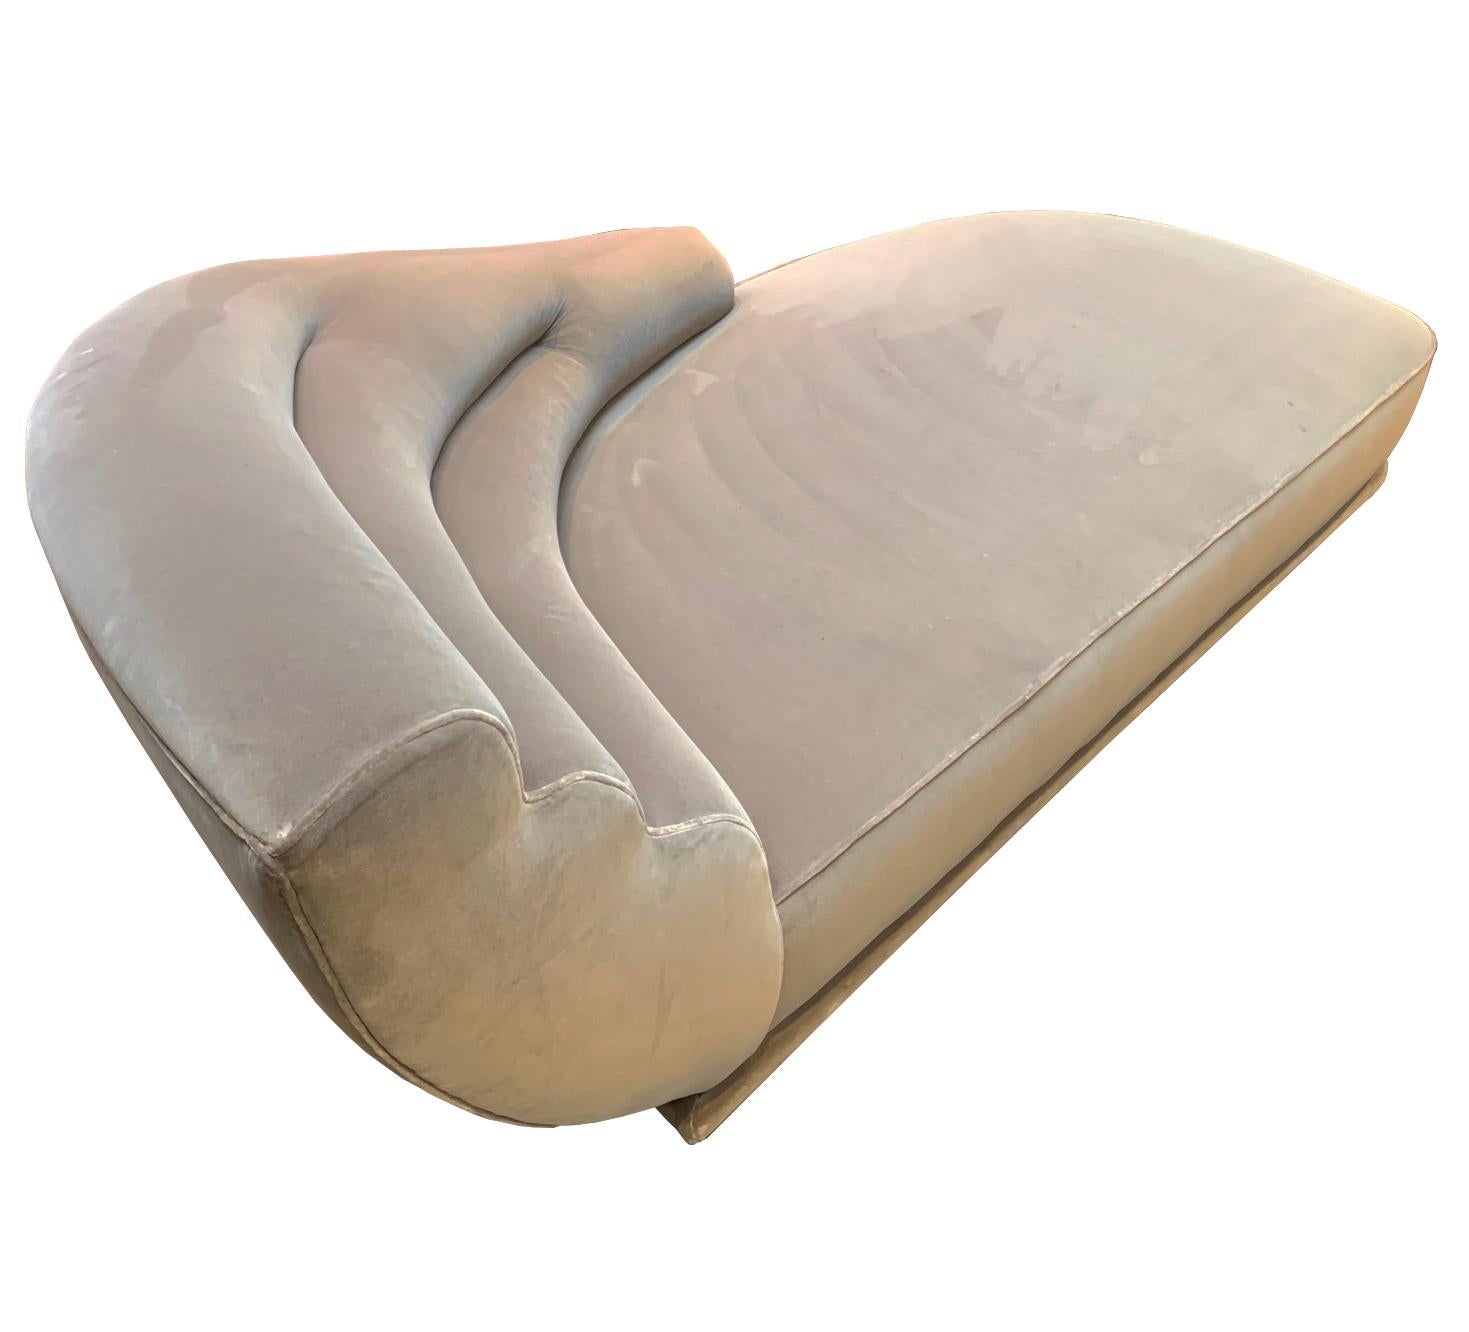 Introducing the 'Gina' Chaise Longue by Promemoria, Italy.

A masterpiece of luxury furniture design that blends functionality with opulent style. This large chaise longue is a marvel of Streamline Moderne aesthetics, featuring undulating lines that